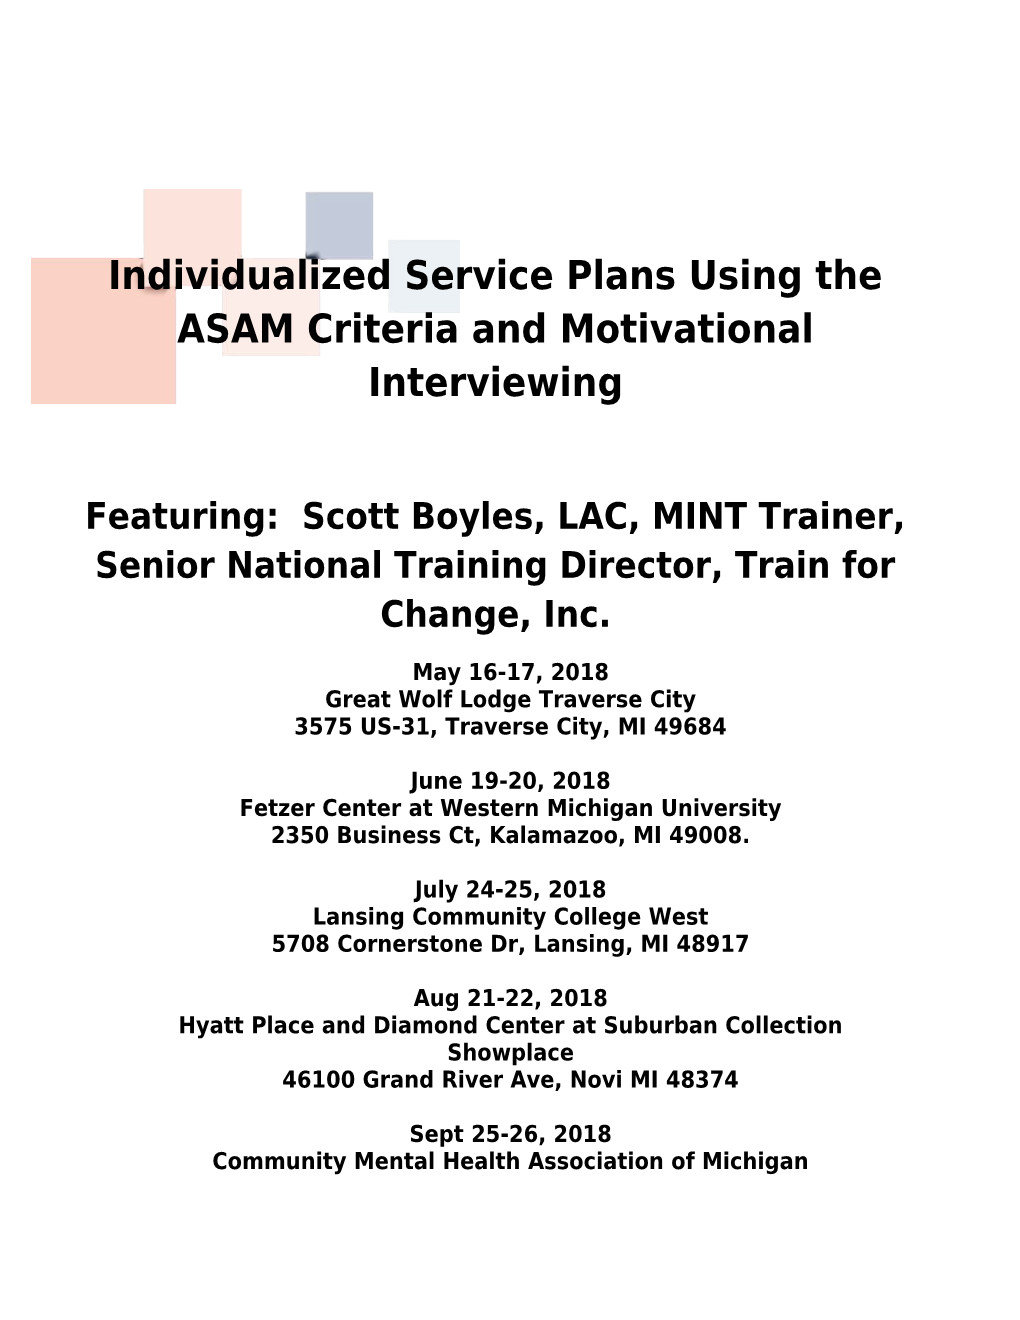 Individualized Service Plans Using the ASAM Criteria and Motivational Interviewing